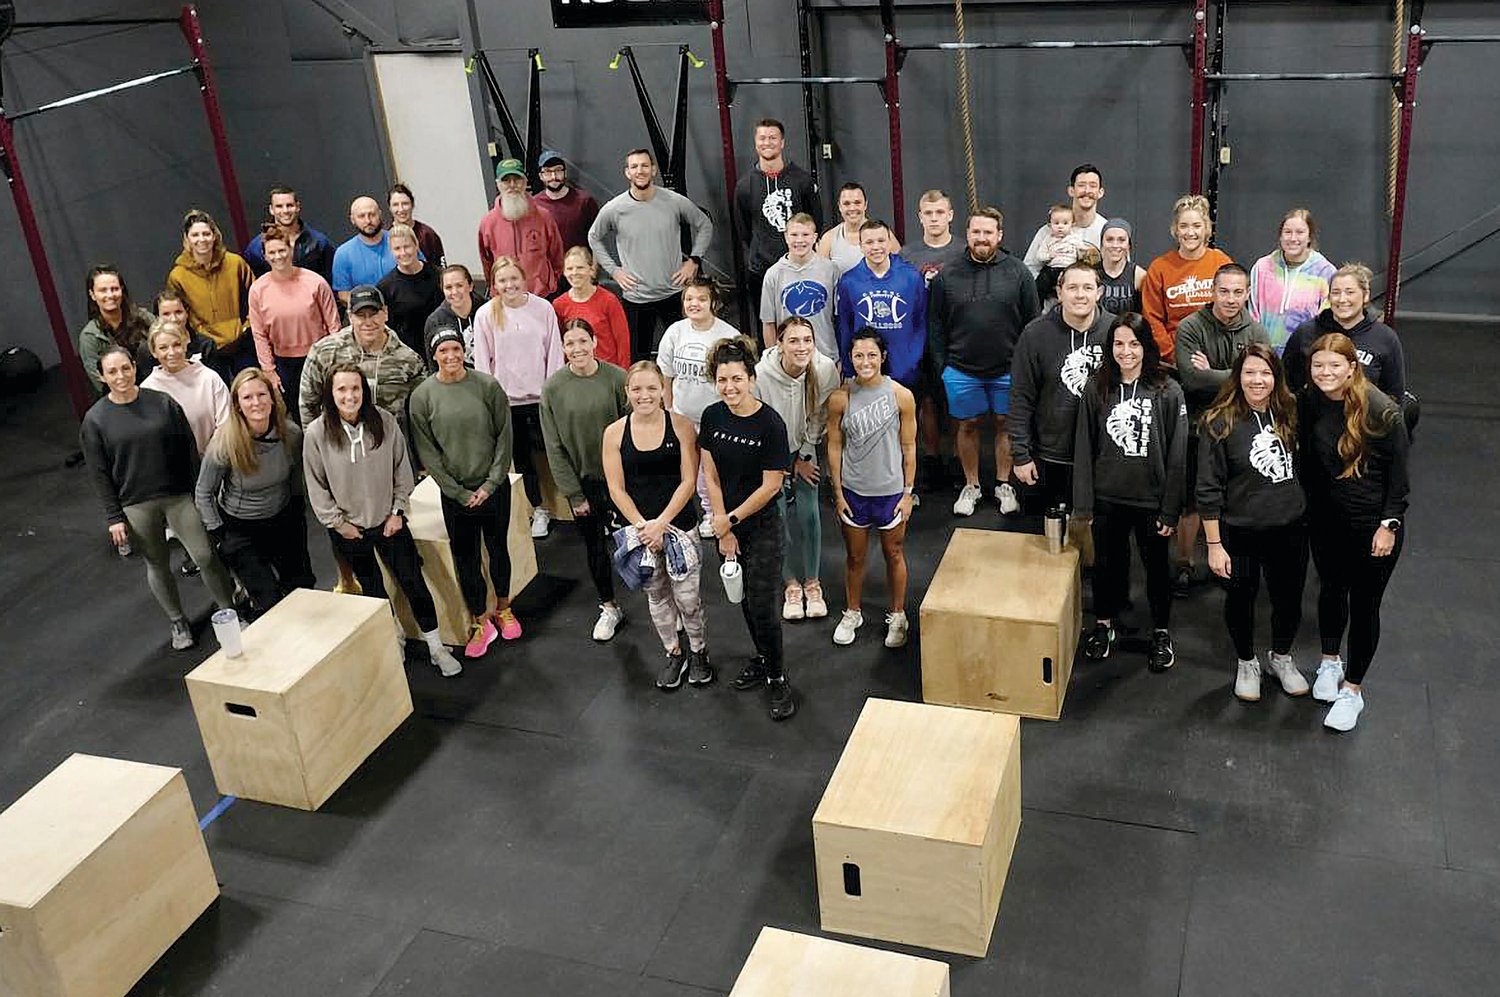 The new CrossFit Mountain Grove business, located at 102 S. Wall St. in Mountain Grove, had a large turnout for their Grand Opening held on Saturday, Jan. 7. CrossFit Mountain Grove also hosted the Mountain Grove Area Chamber of Commerce monthly meeting and lunch two days earlier.